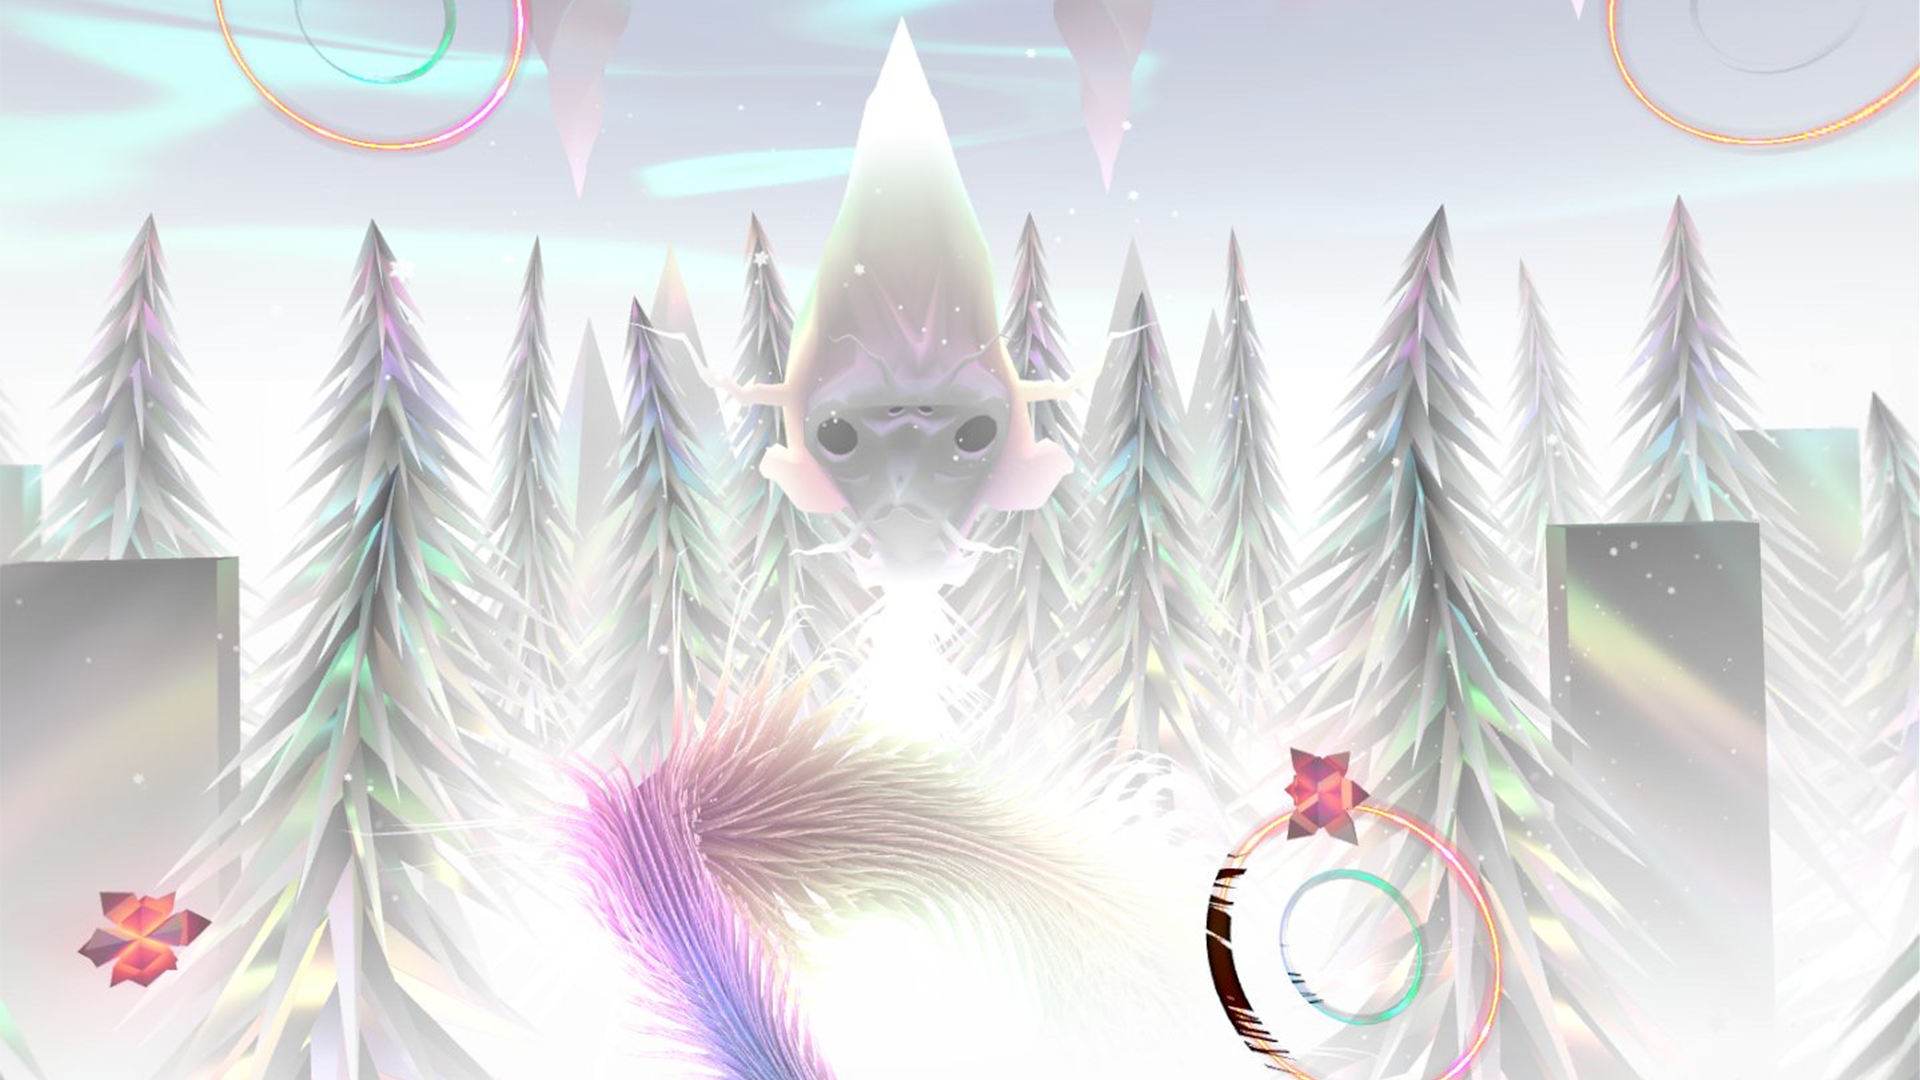 Thrasher screenshot shows a forest of silver trees covered in white light